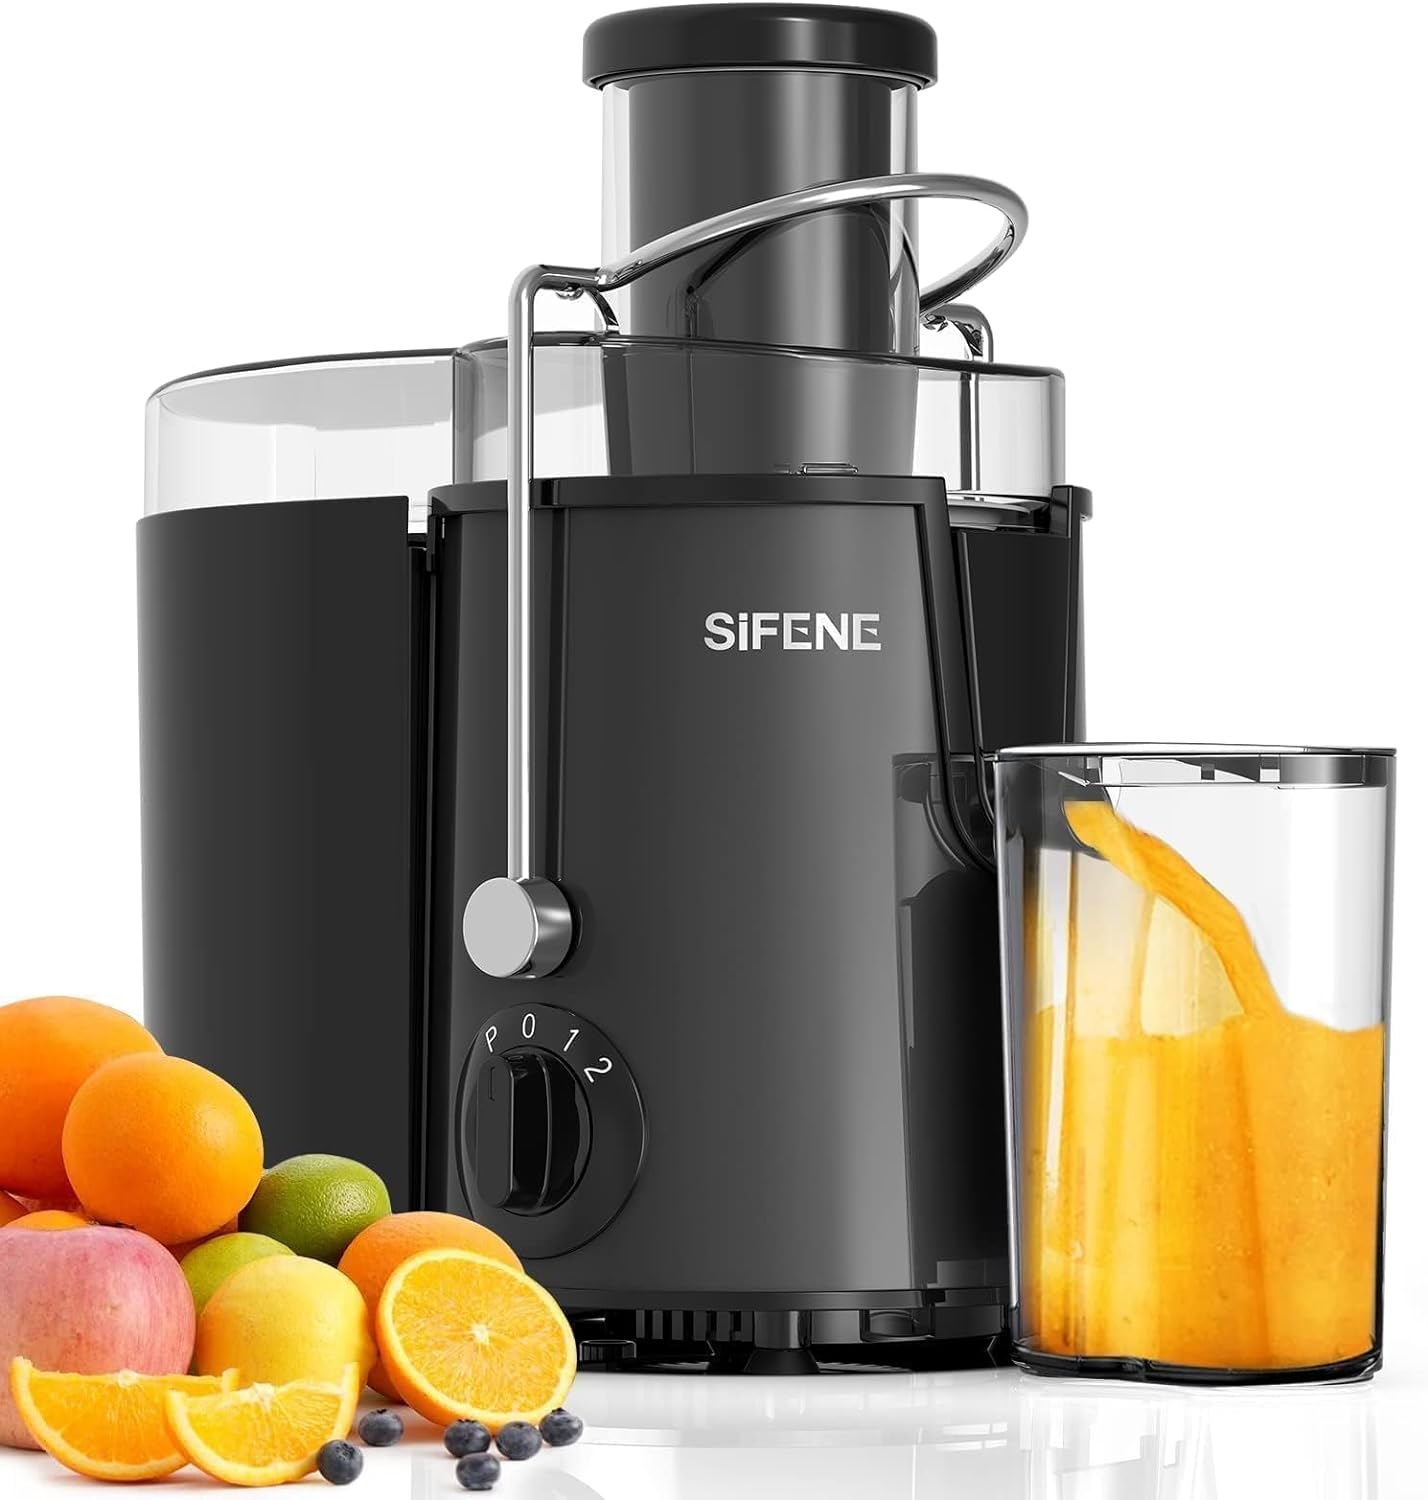 Juicers: The Perfect Appliance for Fresh and Healthy Juices